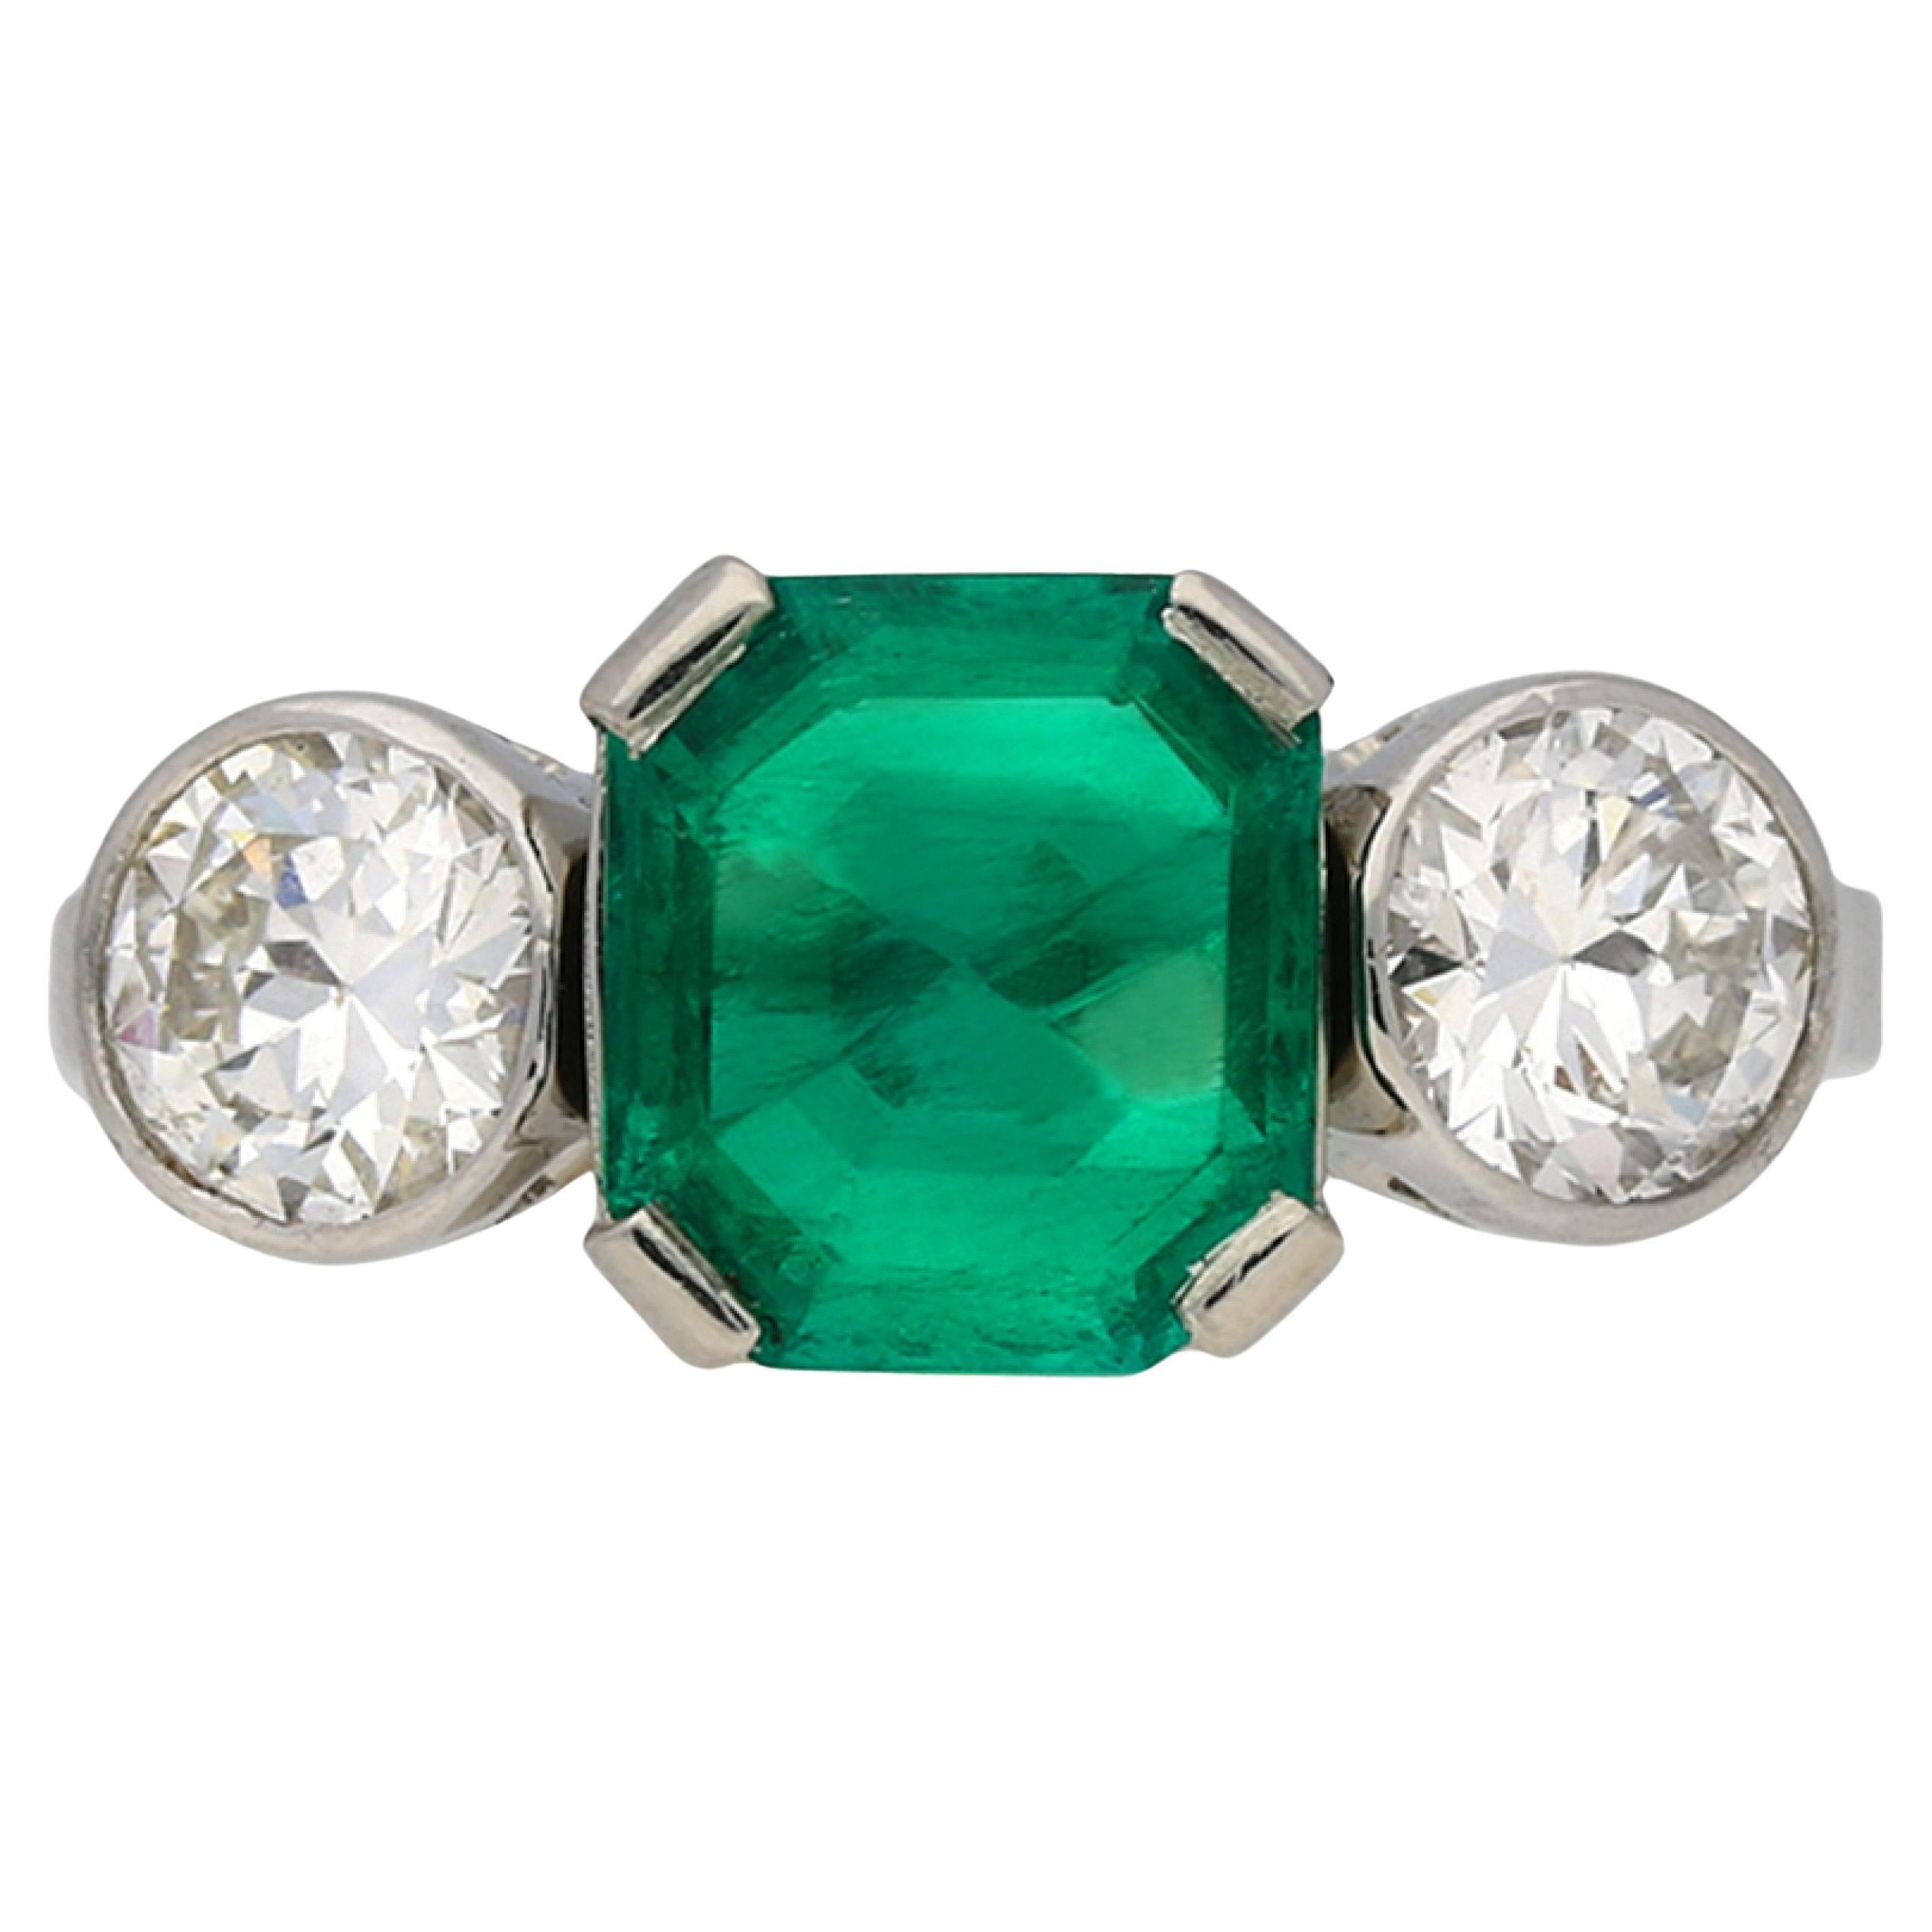 Art Deco Colombian emerald and diamond ring, French, circa 1925